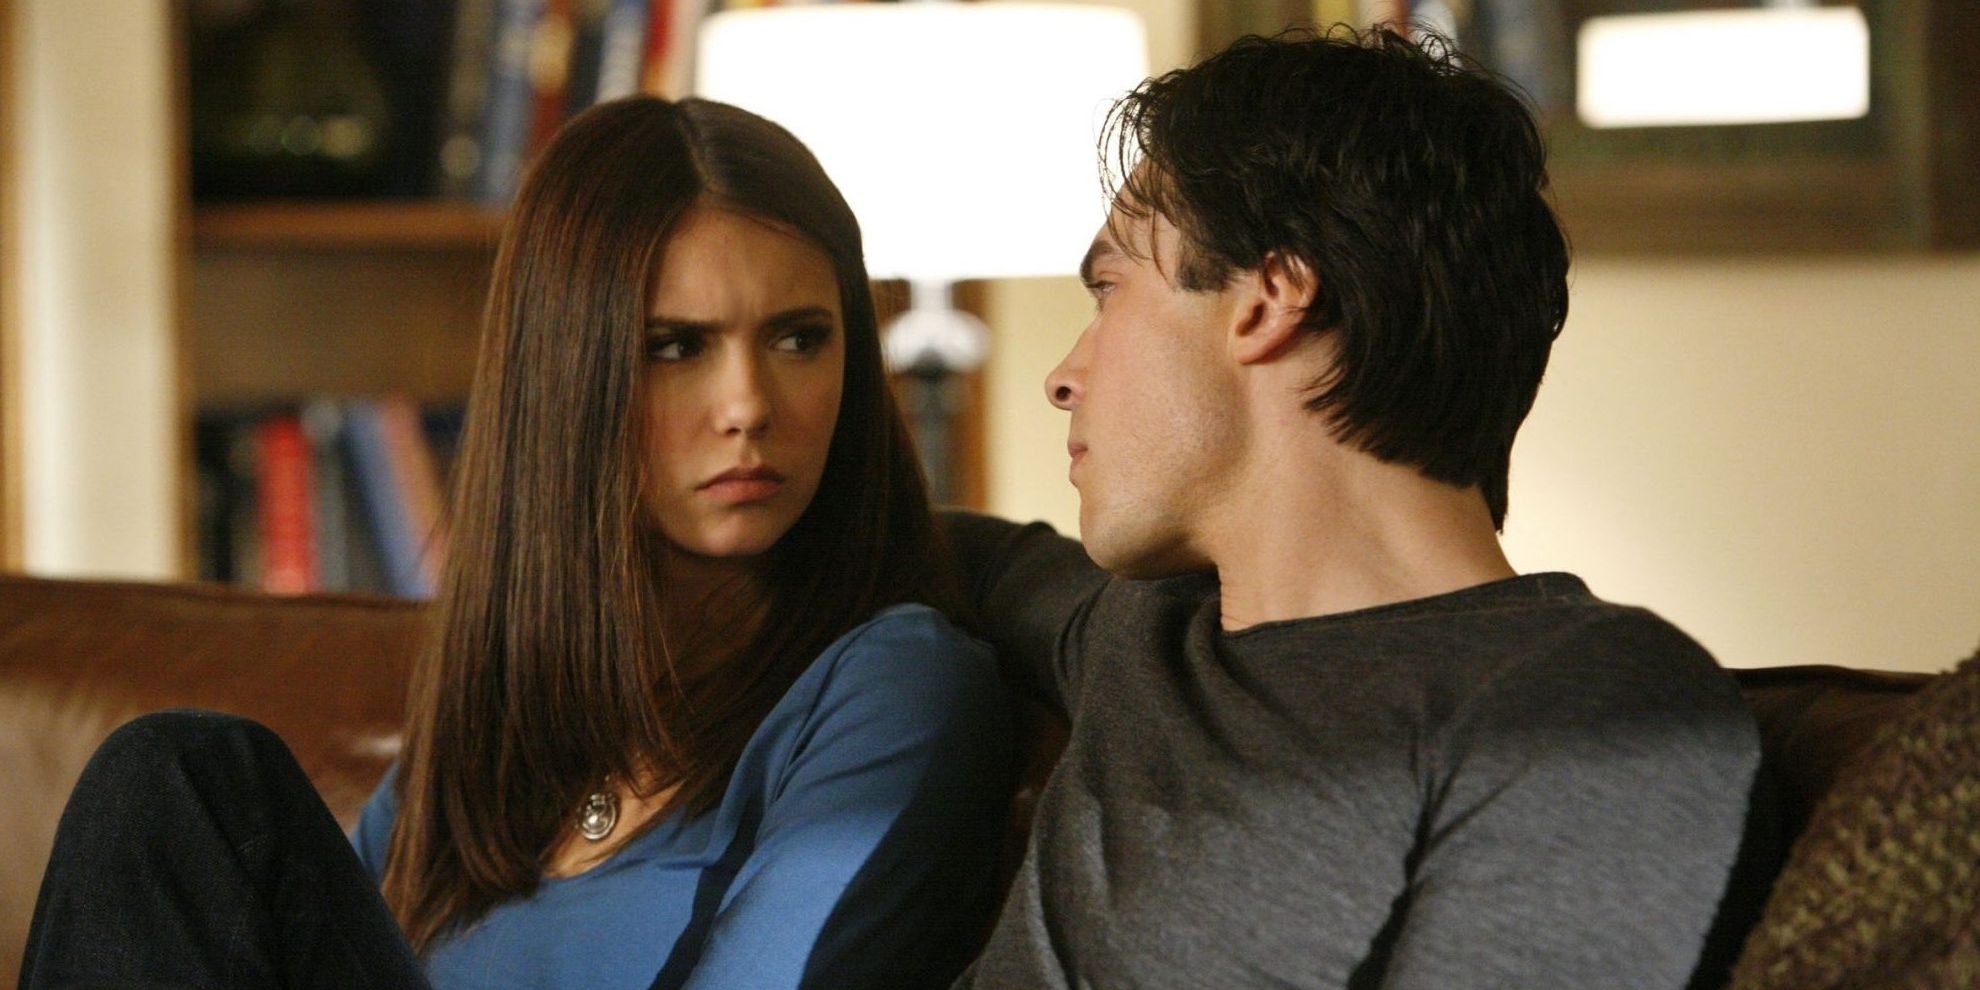 Elena and Damon sitting on the couch in The Vampire Diaries.